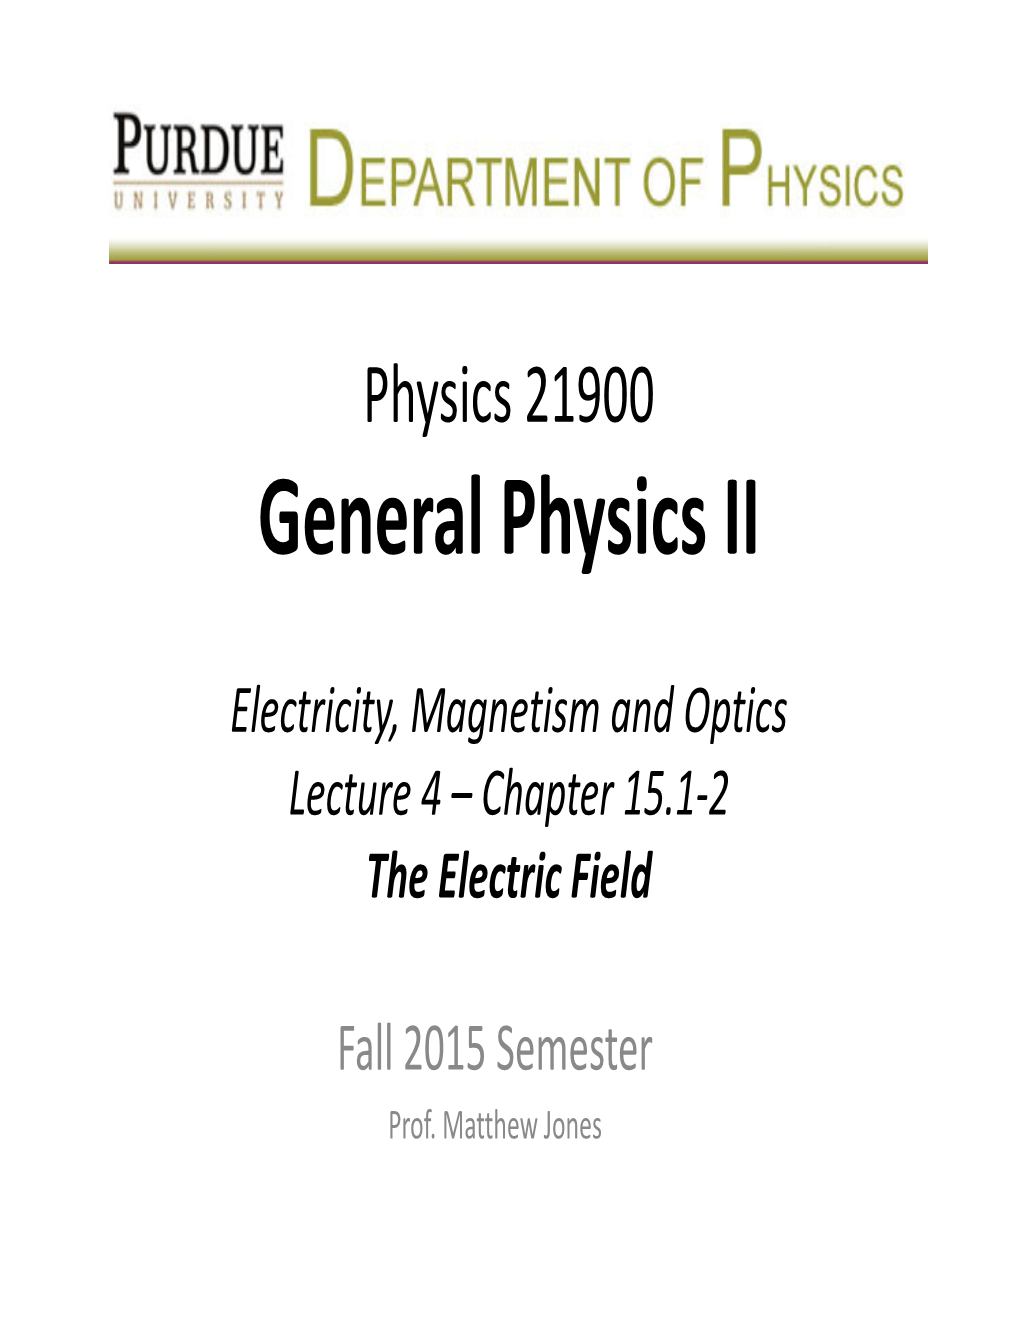 Lecture 4 – Chapter 15.1-2 the Electric Field